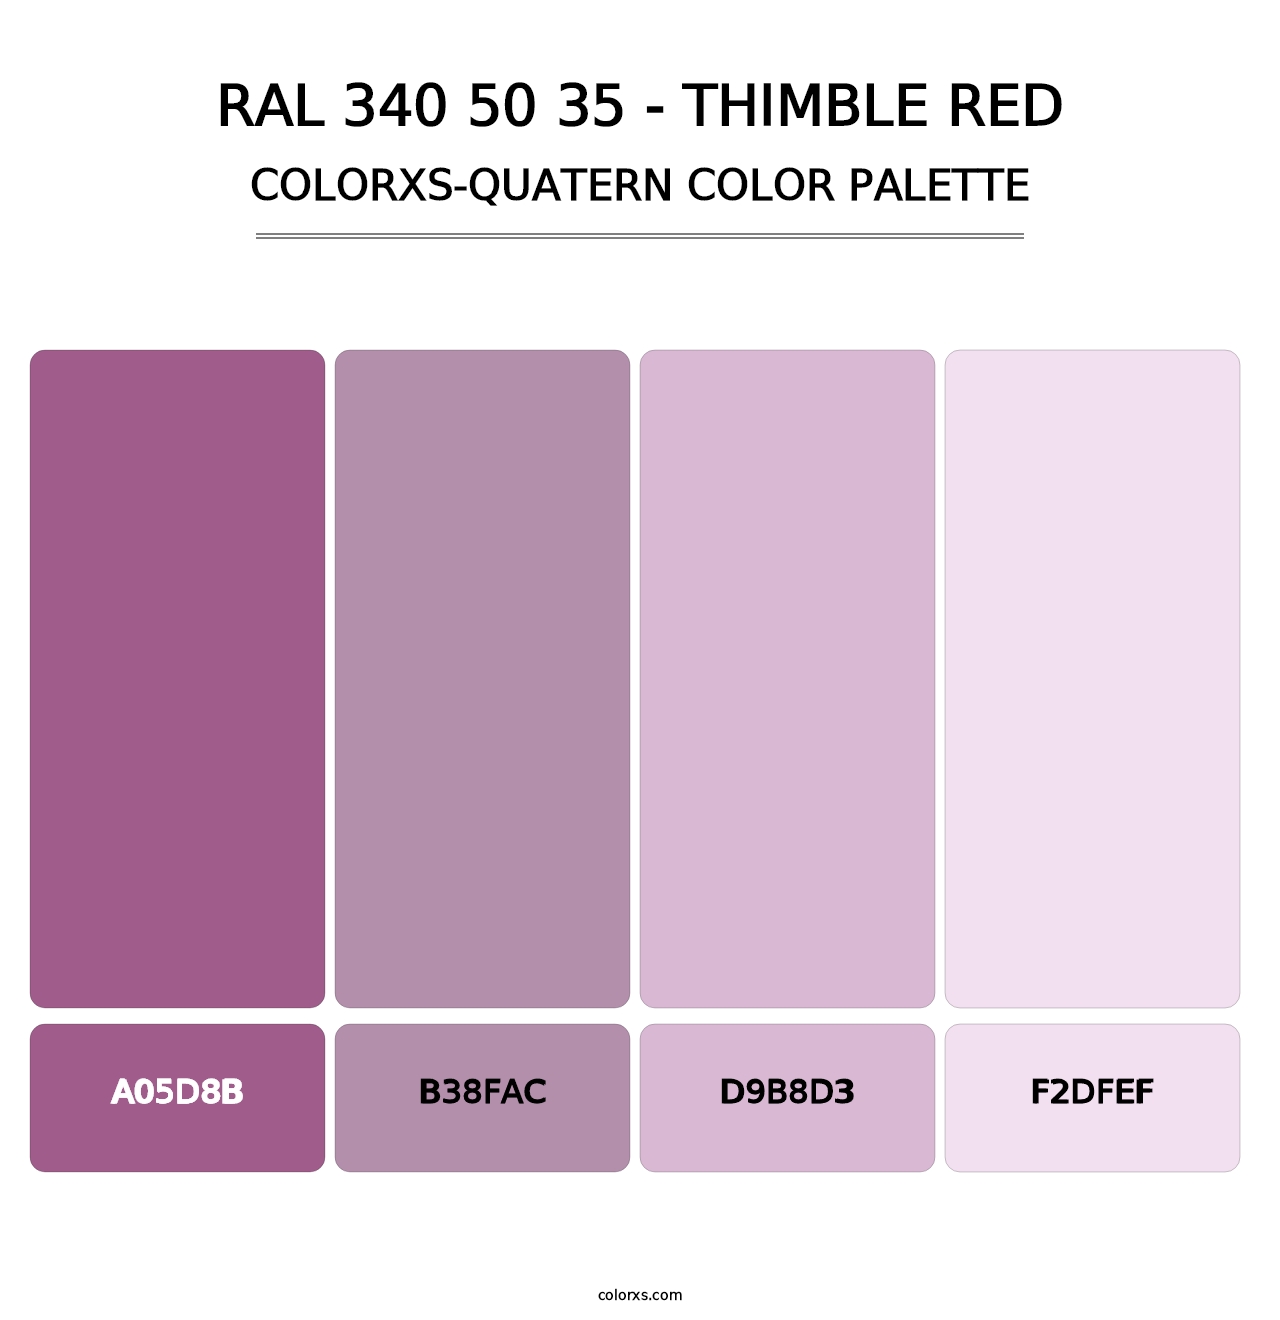 RAL 340 50 35 - Thimble Red - Colorxs Quatern Palette